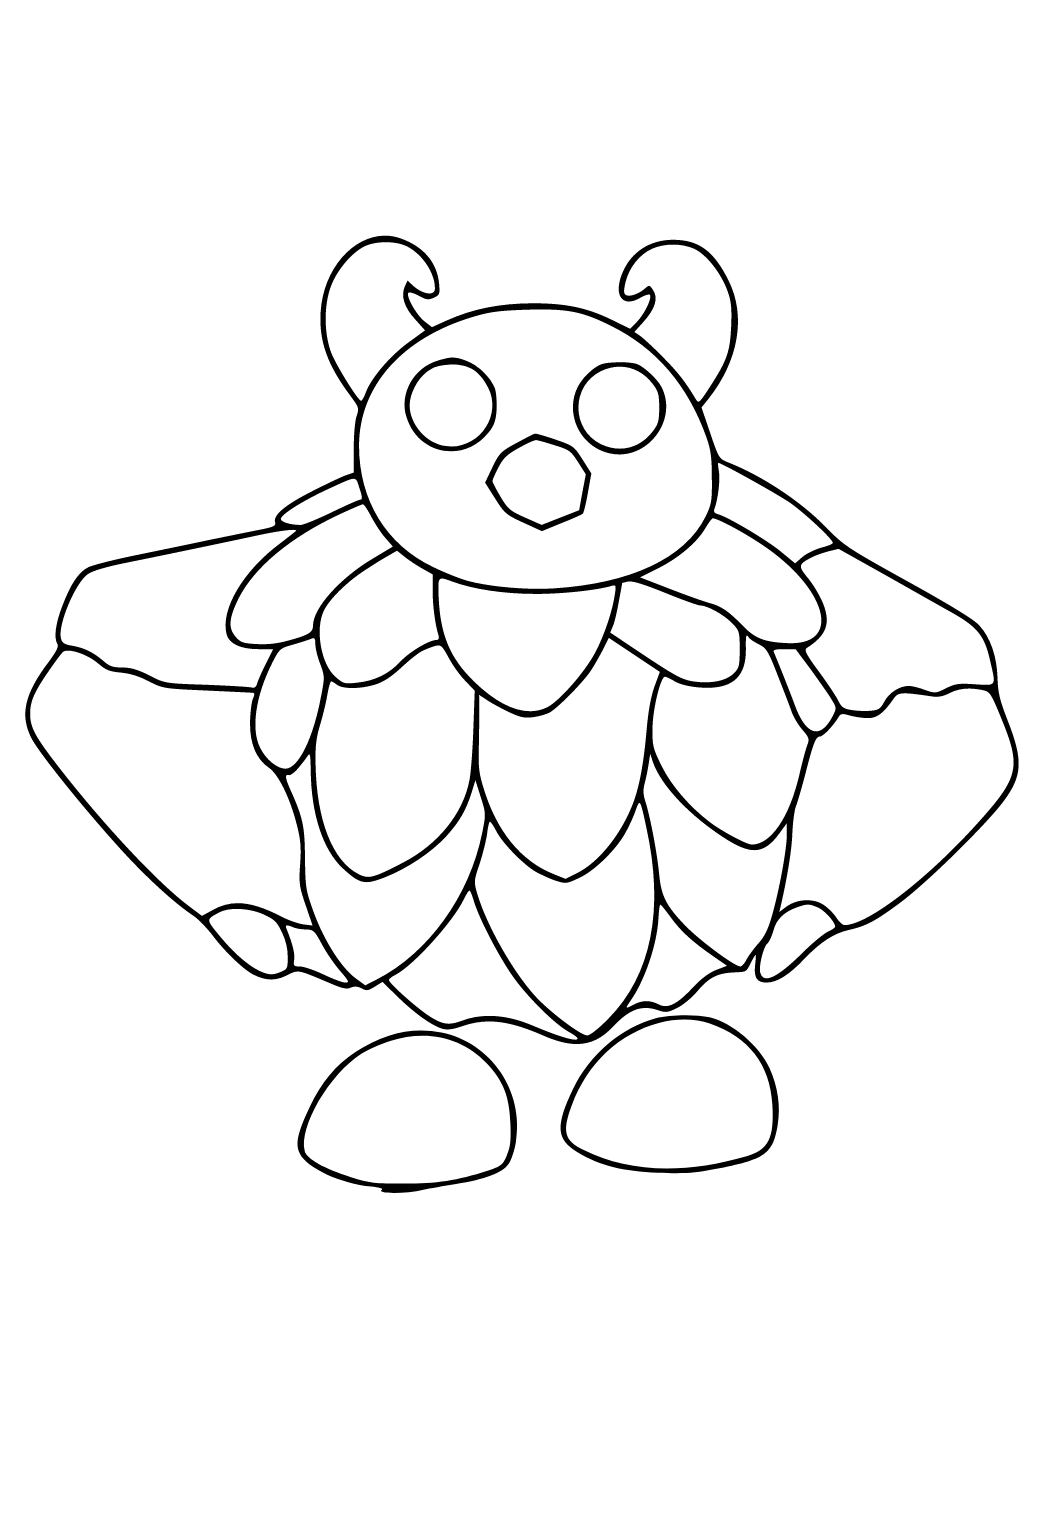 Free Printable Adopt Me Monster Coloring Page for Adults and Kids ...